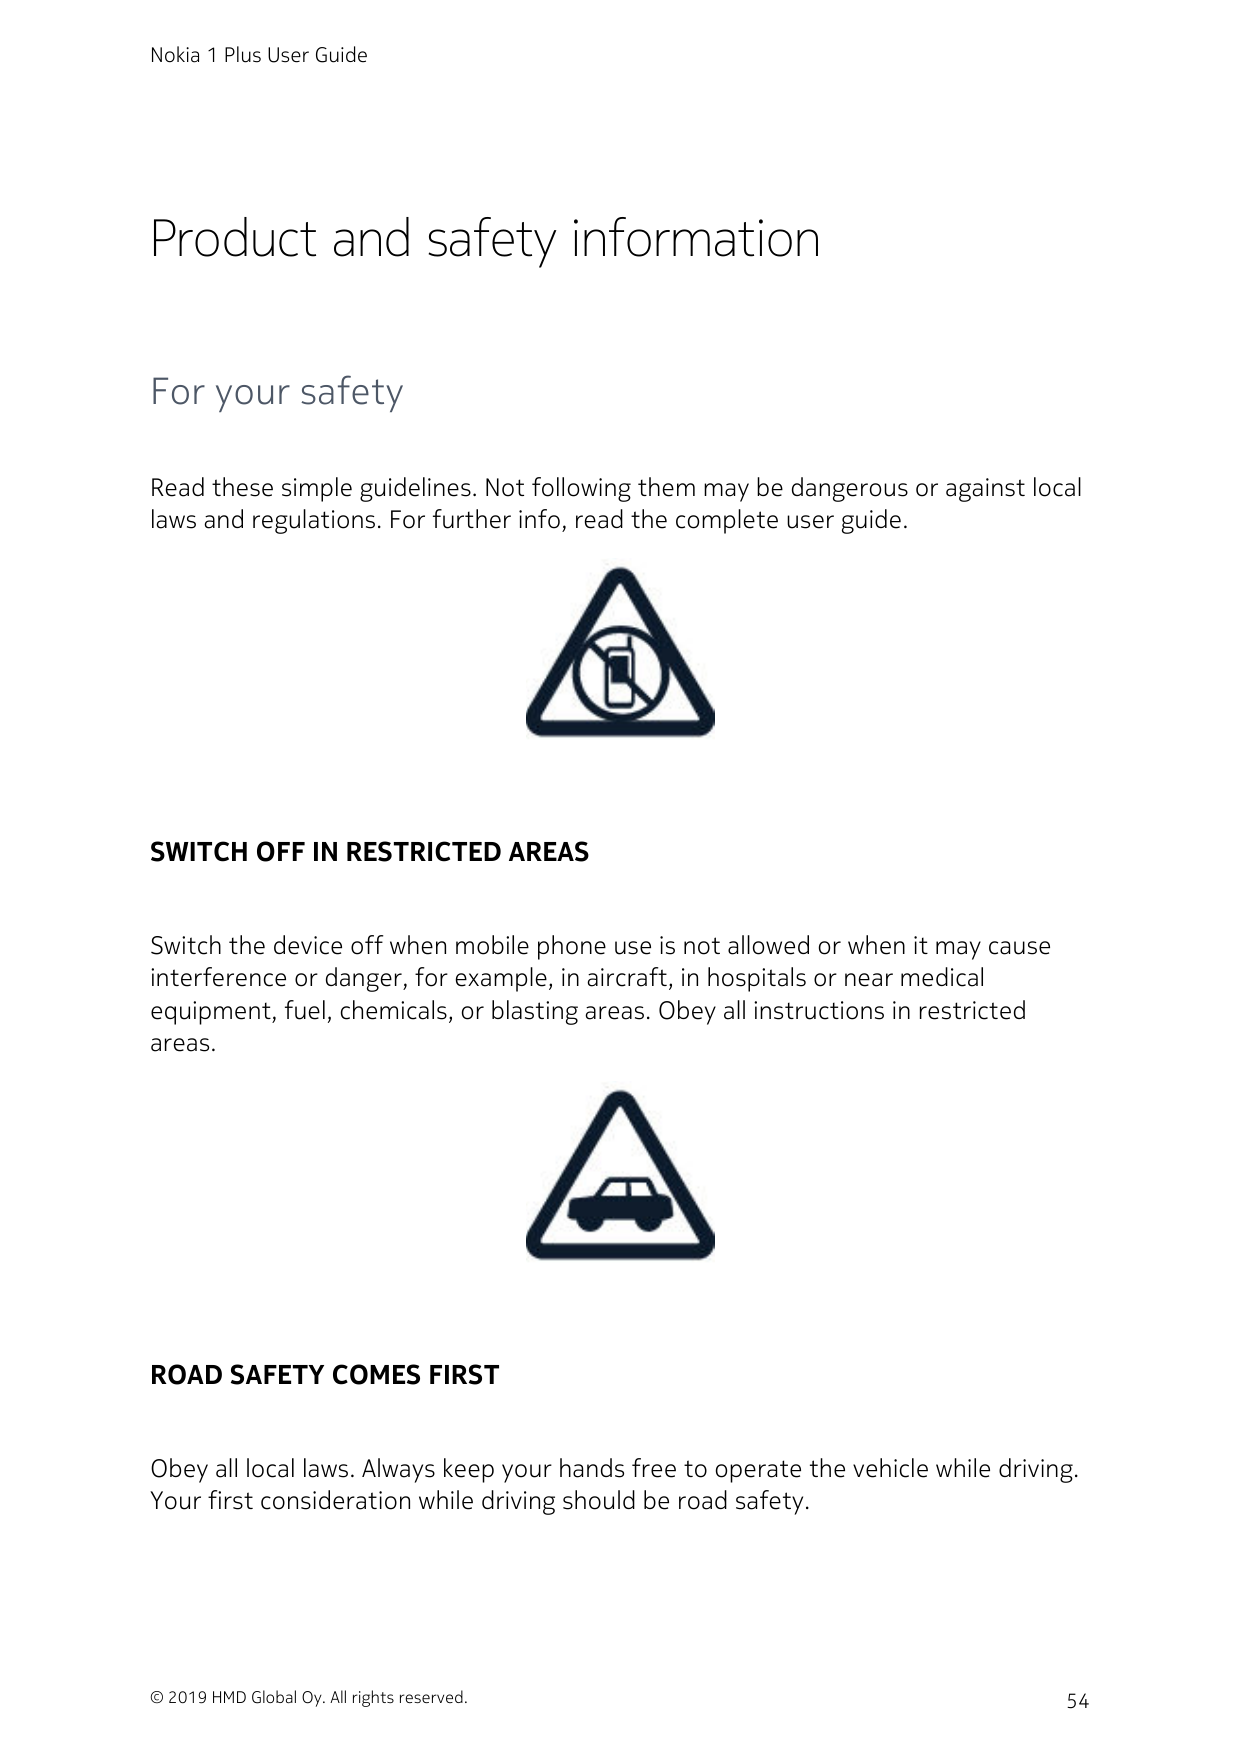 Nokia 1 Plus User GuideProduct and safety informationFor your safetyRead these simple guidelines. Not following them may be dang